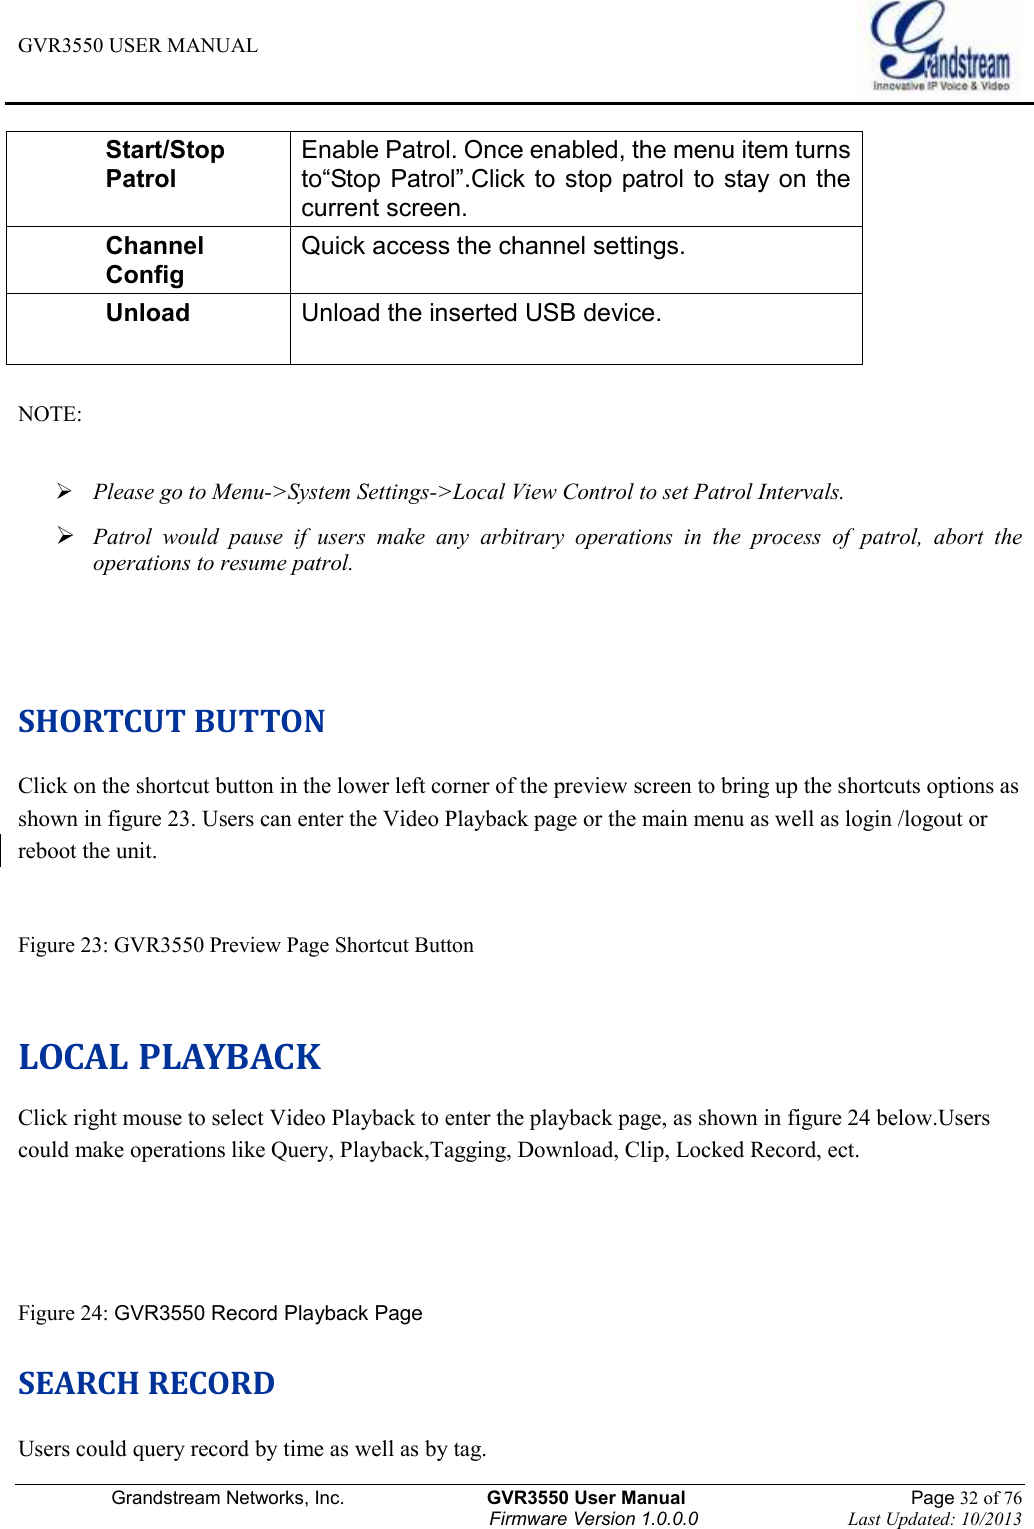 GVR3550 USER MANUAL   Grandstream Networks, Inc.                    GVR3550 User Manual                                                Page 32 of 76 Firmware Version 1.0.0.0                                Last Updated: 10/2013  Start/Stop Patrol Enable Patrol. Once enabled, the menu item turns to“Stop Patrol”.Click to stop patrol to stay on the current screen. Channel Config Quick access the channel settings. Unload Unload the inserted USB device.   NOTE:     Please go to Menu-&gt;System Settings-&gt;Local View Control to set Patrol Intervals.  Patrol  would  pause  if  users  make  any  arbitrary  operations  in  the  process  of  patrol,  abort  the operations to resume patrol.     SHORTCUT BUTTON Click on the shortcut button in the lower left corner of the preview screen to bring up the shortcuts options as shown in figure 23. Users can enter the Video Playback page or the main menu as well as login /logout or reboot the unit.  Figure 23: GVR3550 Preview Page Shortcut Button  LOCAL PLAYBACK Click right mouse to select Video Playback to enter the playback page, as shown in figure 24 below.Users could make operations like Query, Playback,Tagging, Download, Clip, Locked Record, ect.     Figure 24: GVR3550 Record Playback Page SEARCH RECORD Users could query record by time as well as by tag. 